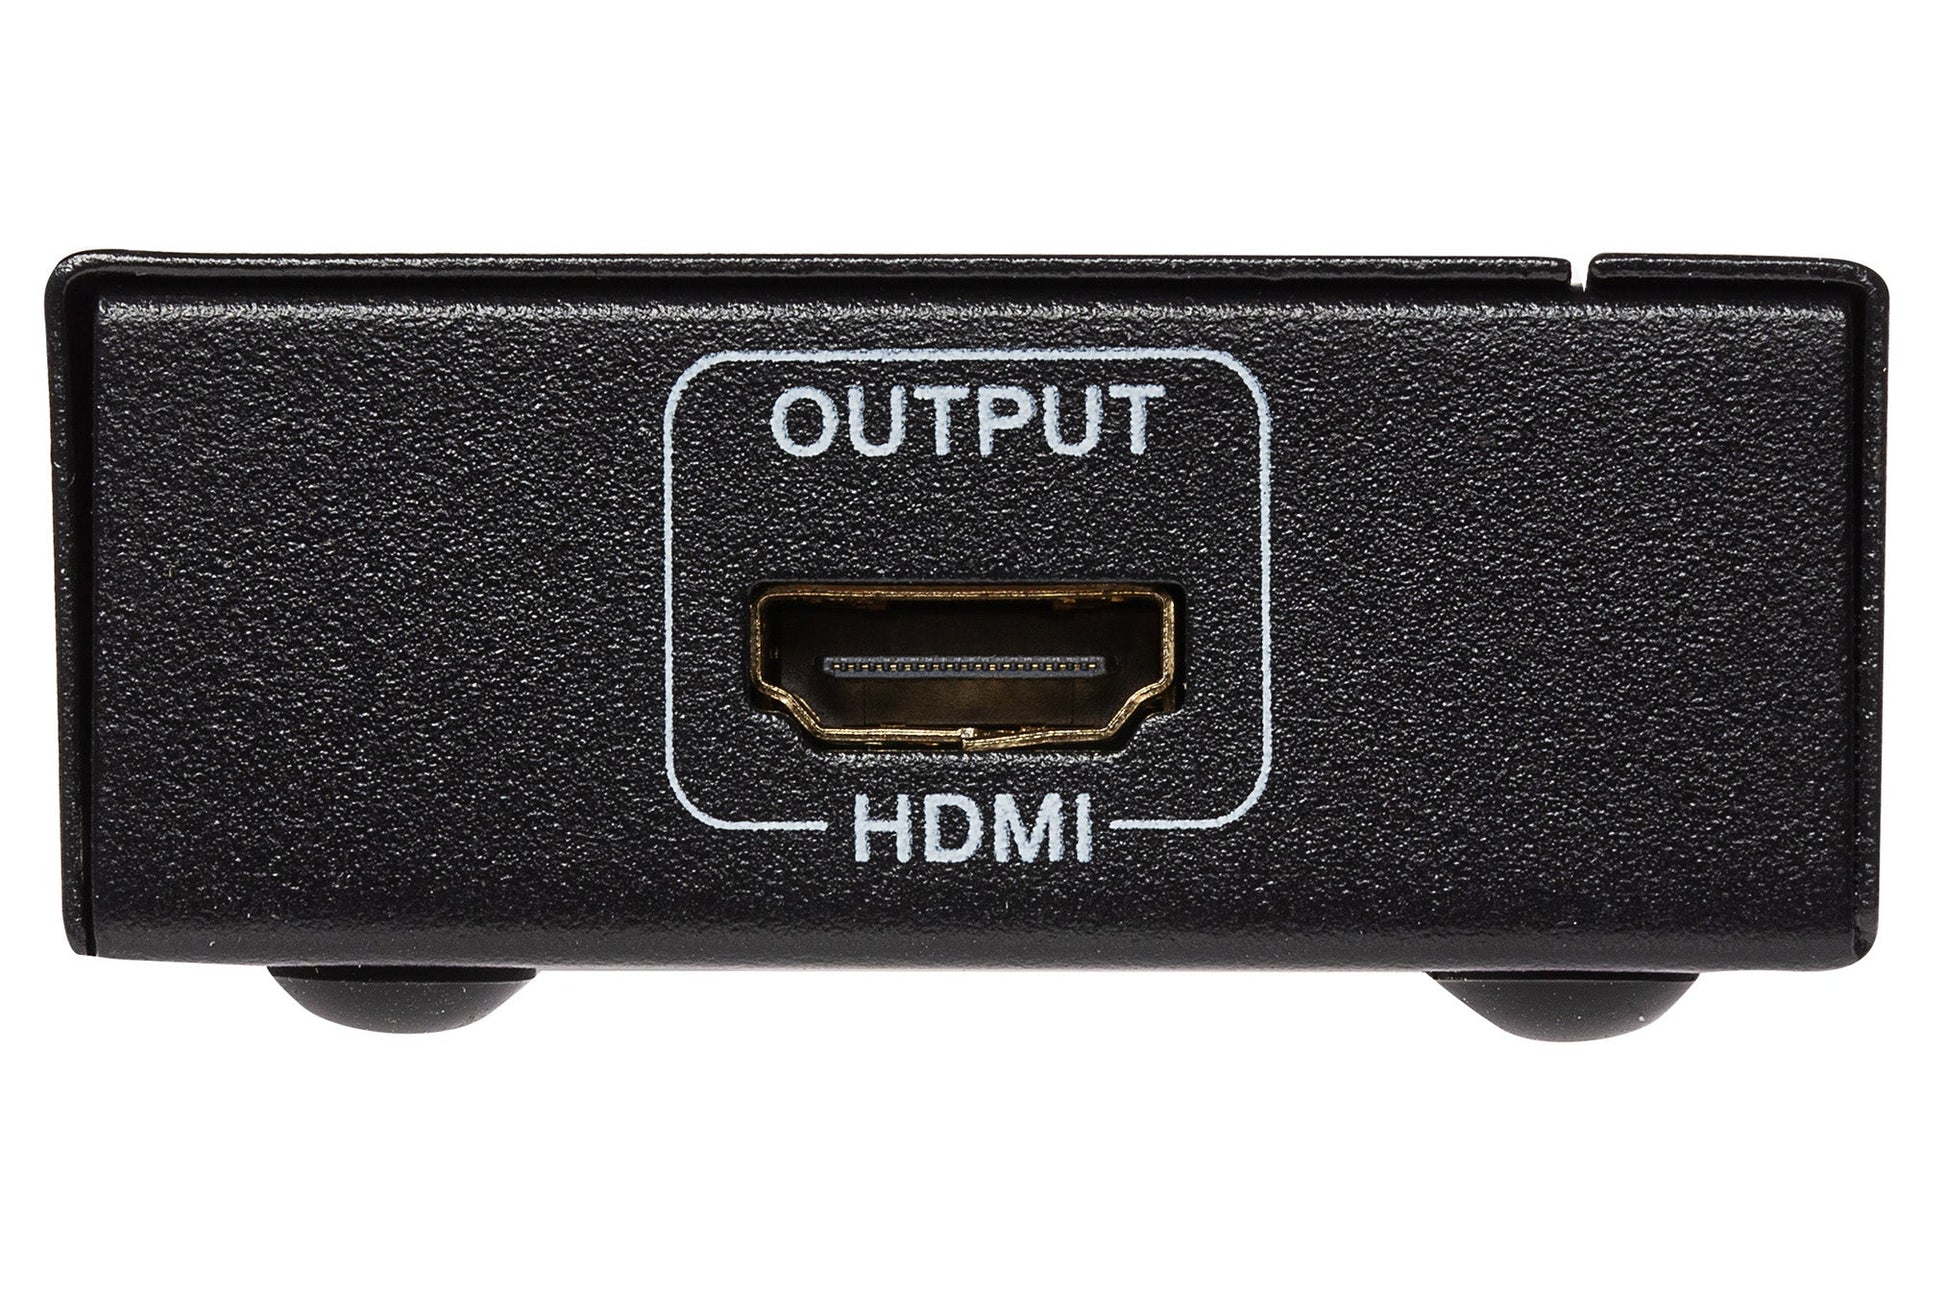 Nikkai HDMI Switch 5 Ports in 1 Port out 4k 30Hz Resolution with Remote Control - Black - maplin.co.uk